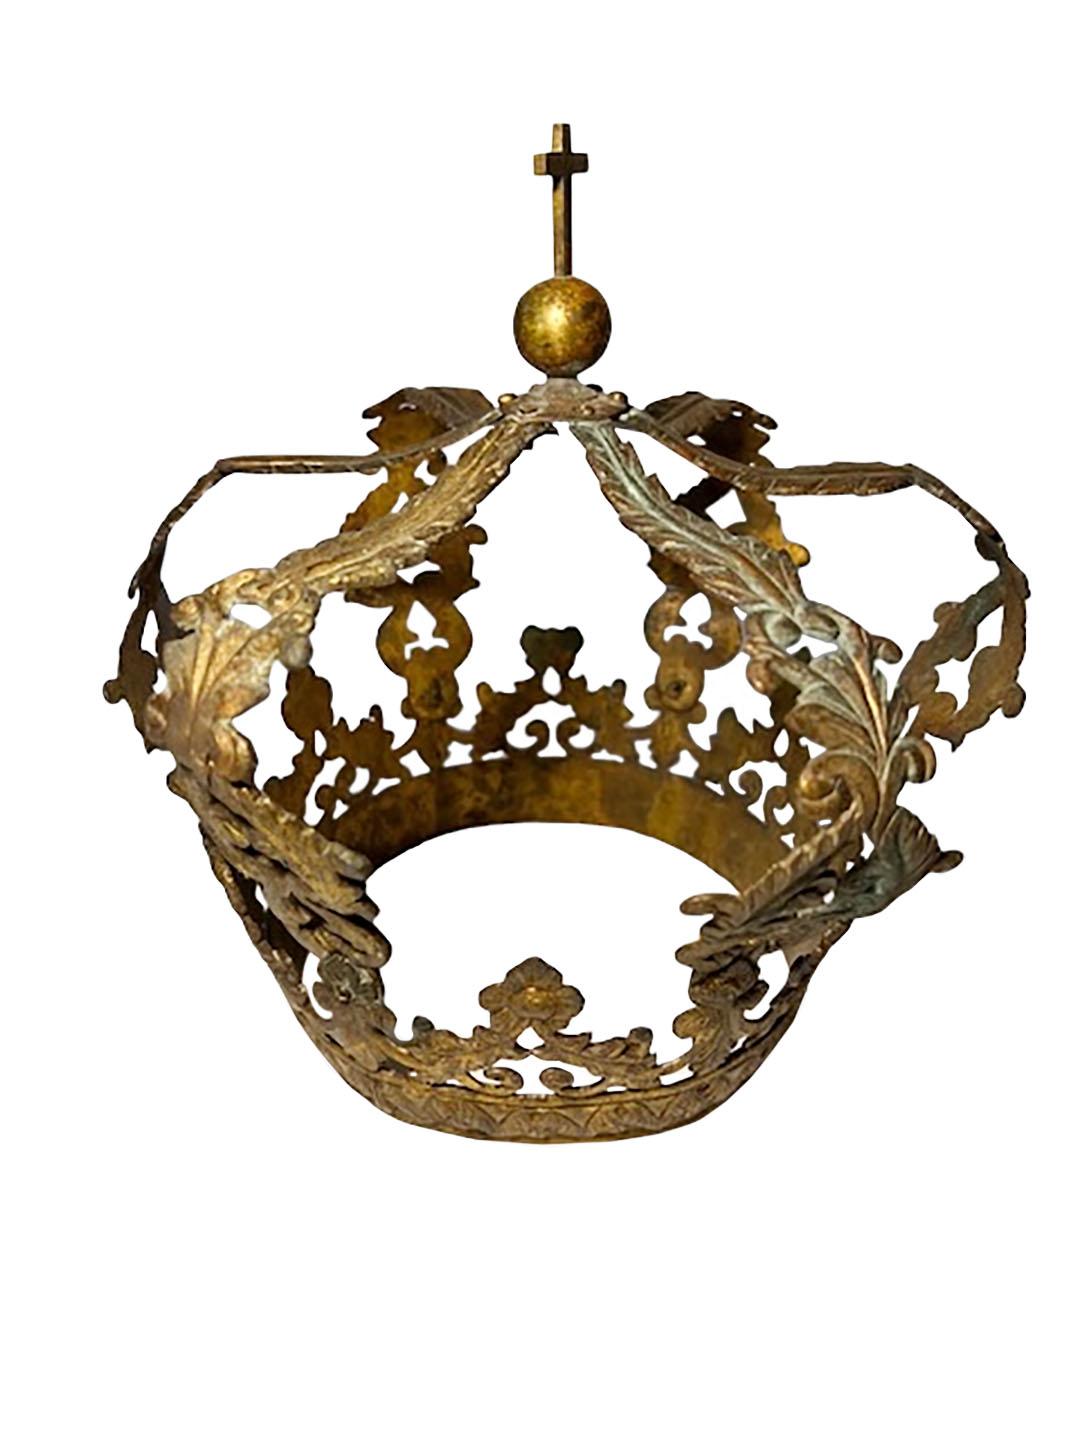 An 18th century Italian bronze crown handcrafted with beautiful scroll work and leaf designs. Has an orb surmounted by a cross on top.